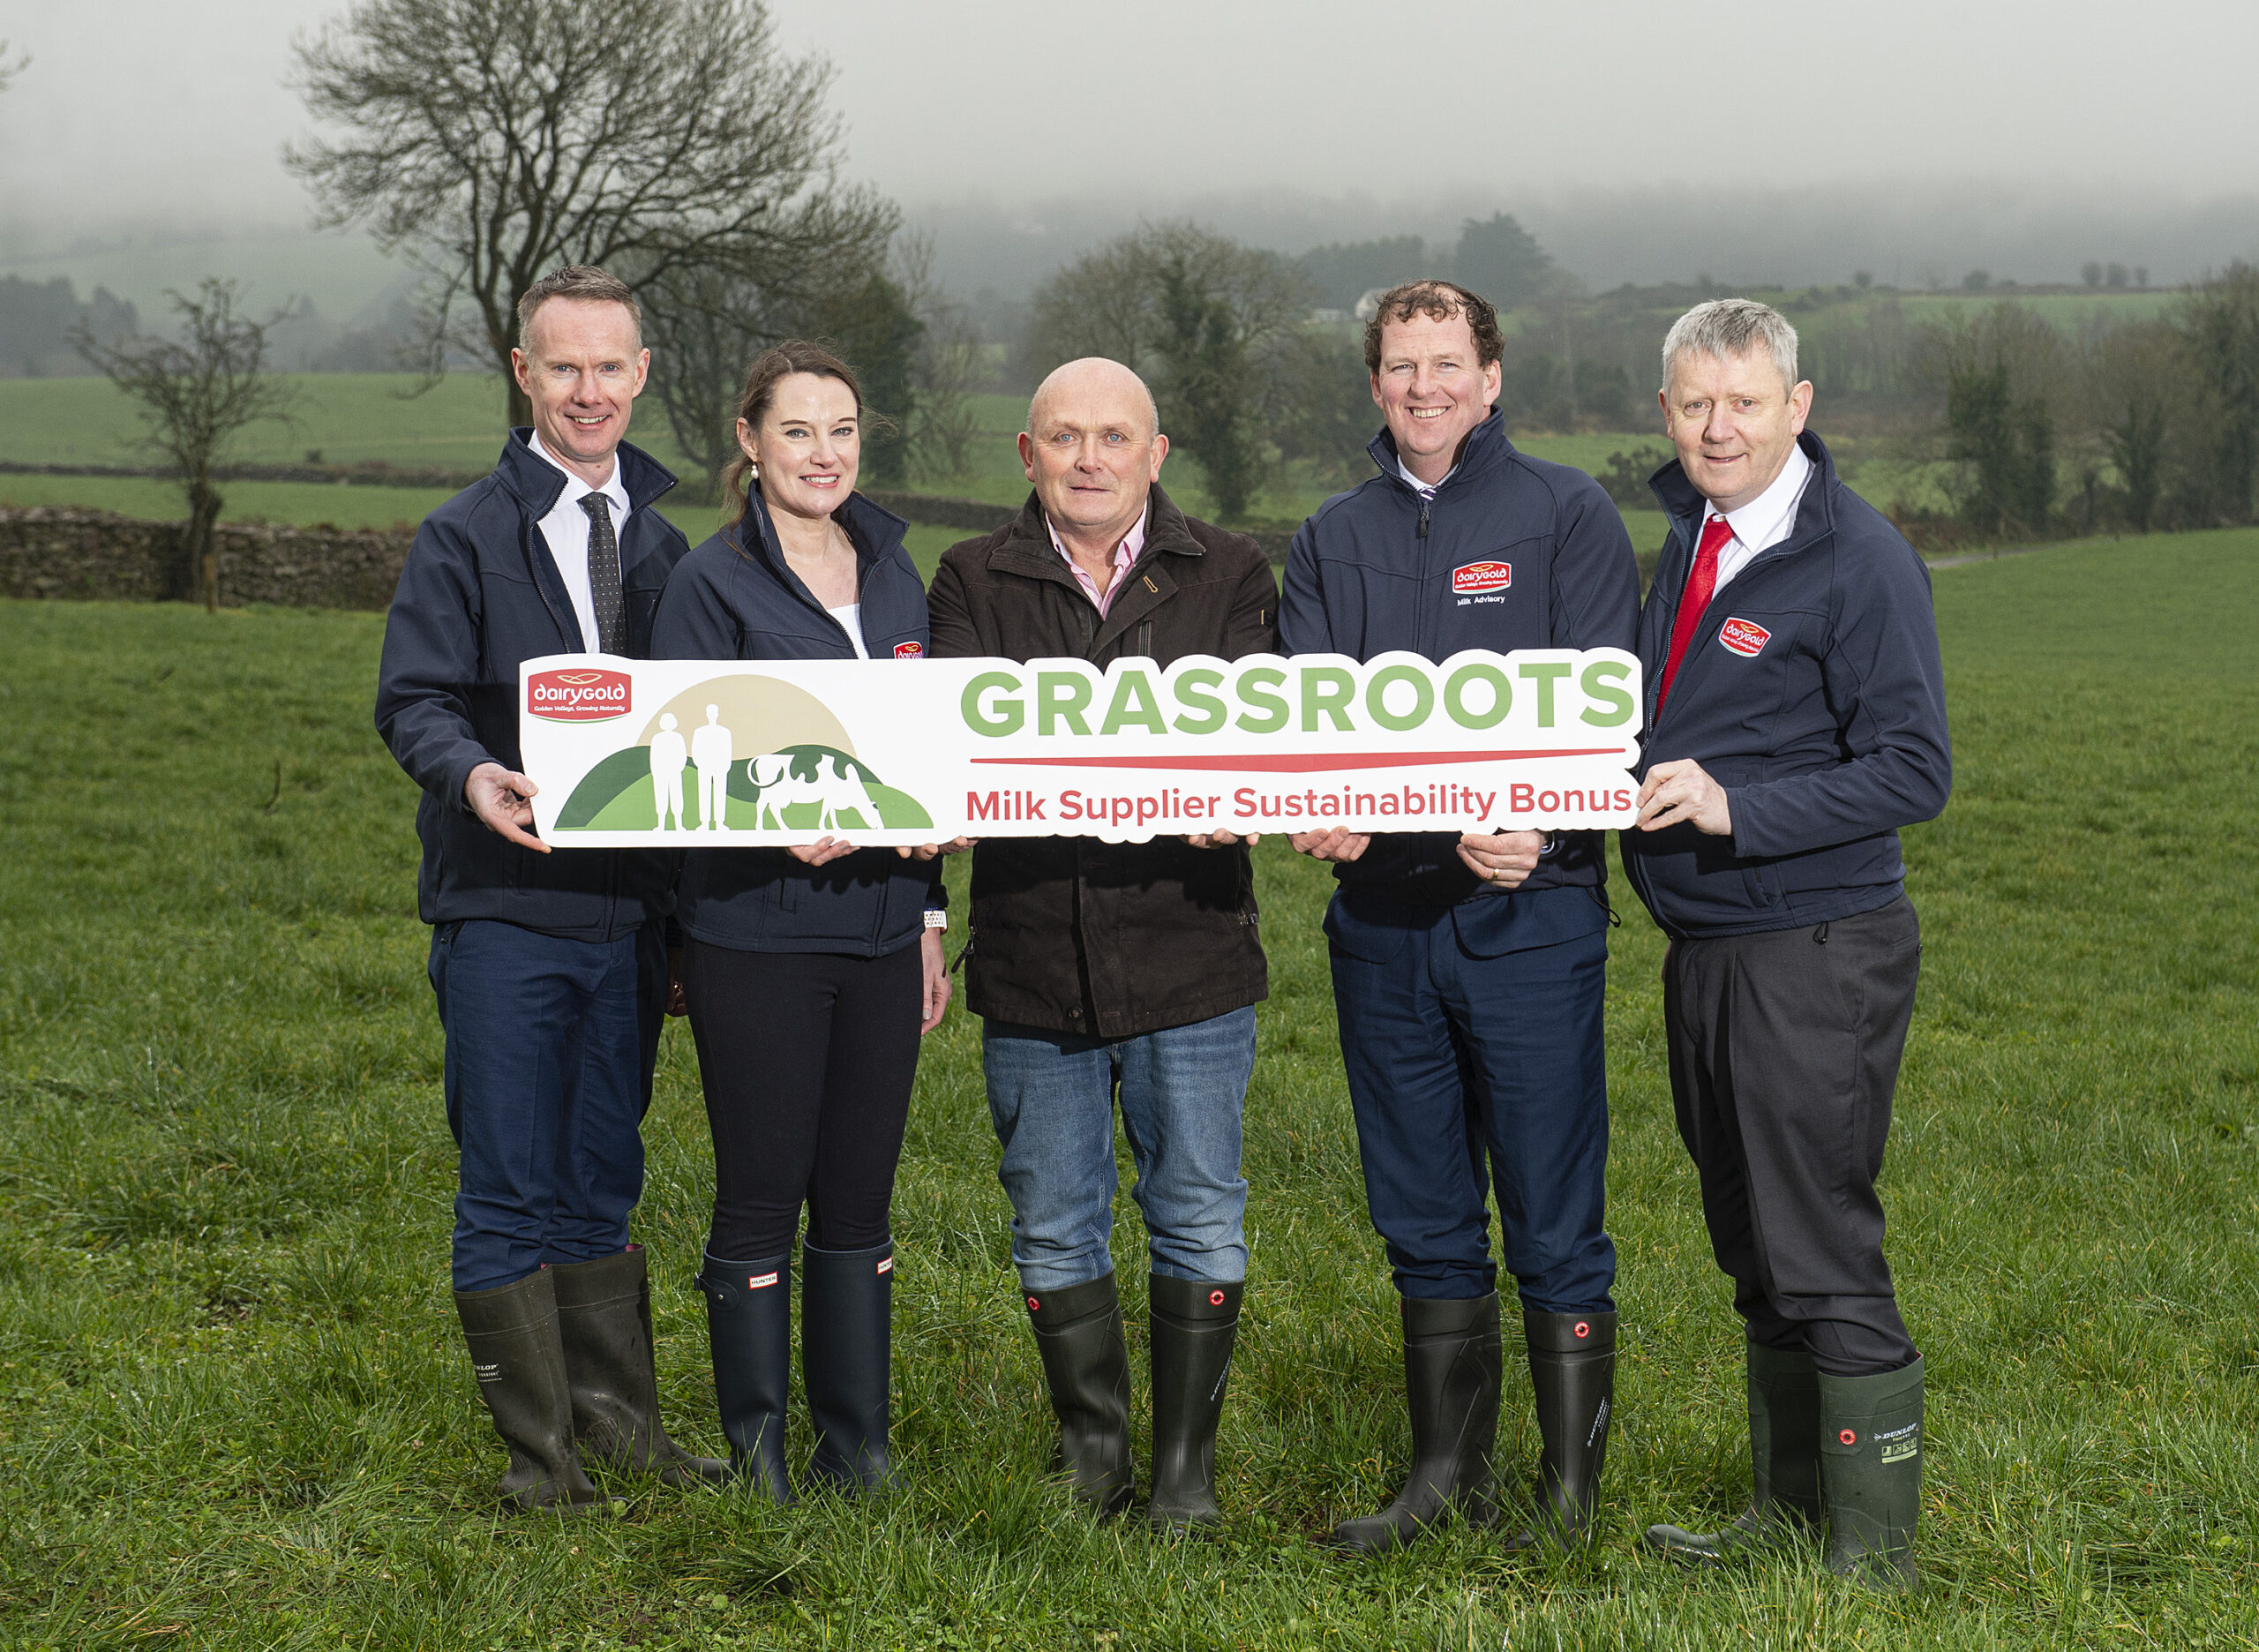 Dairygold launches €10 million sustainability bonus for its Milk Suppliers